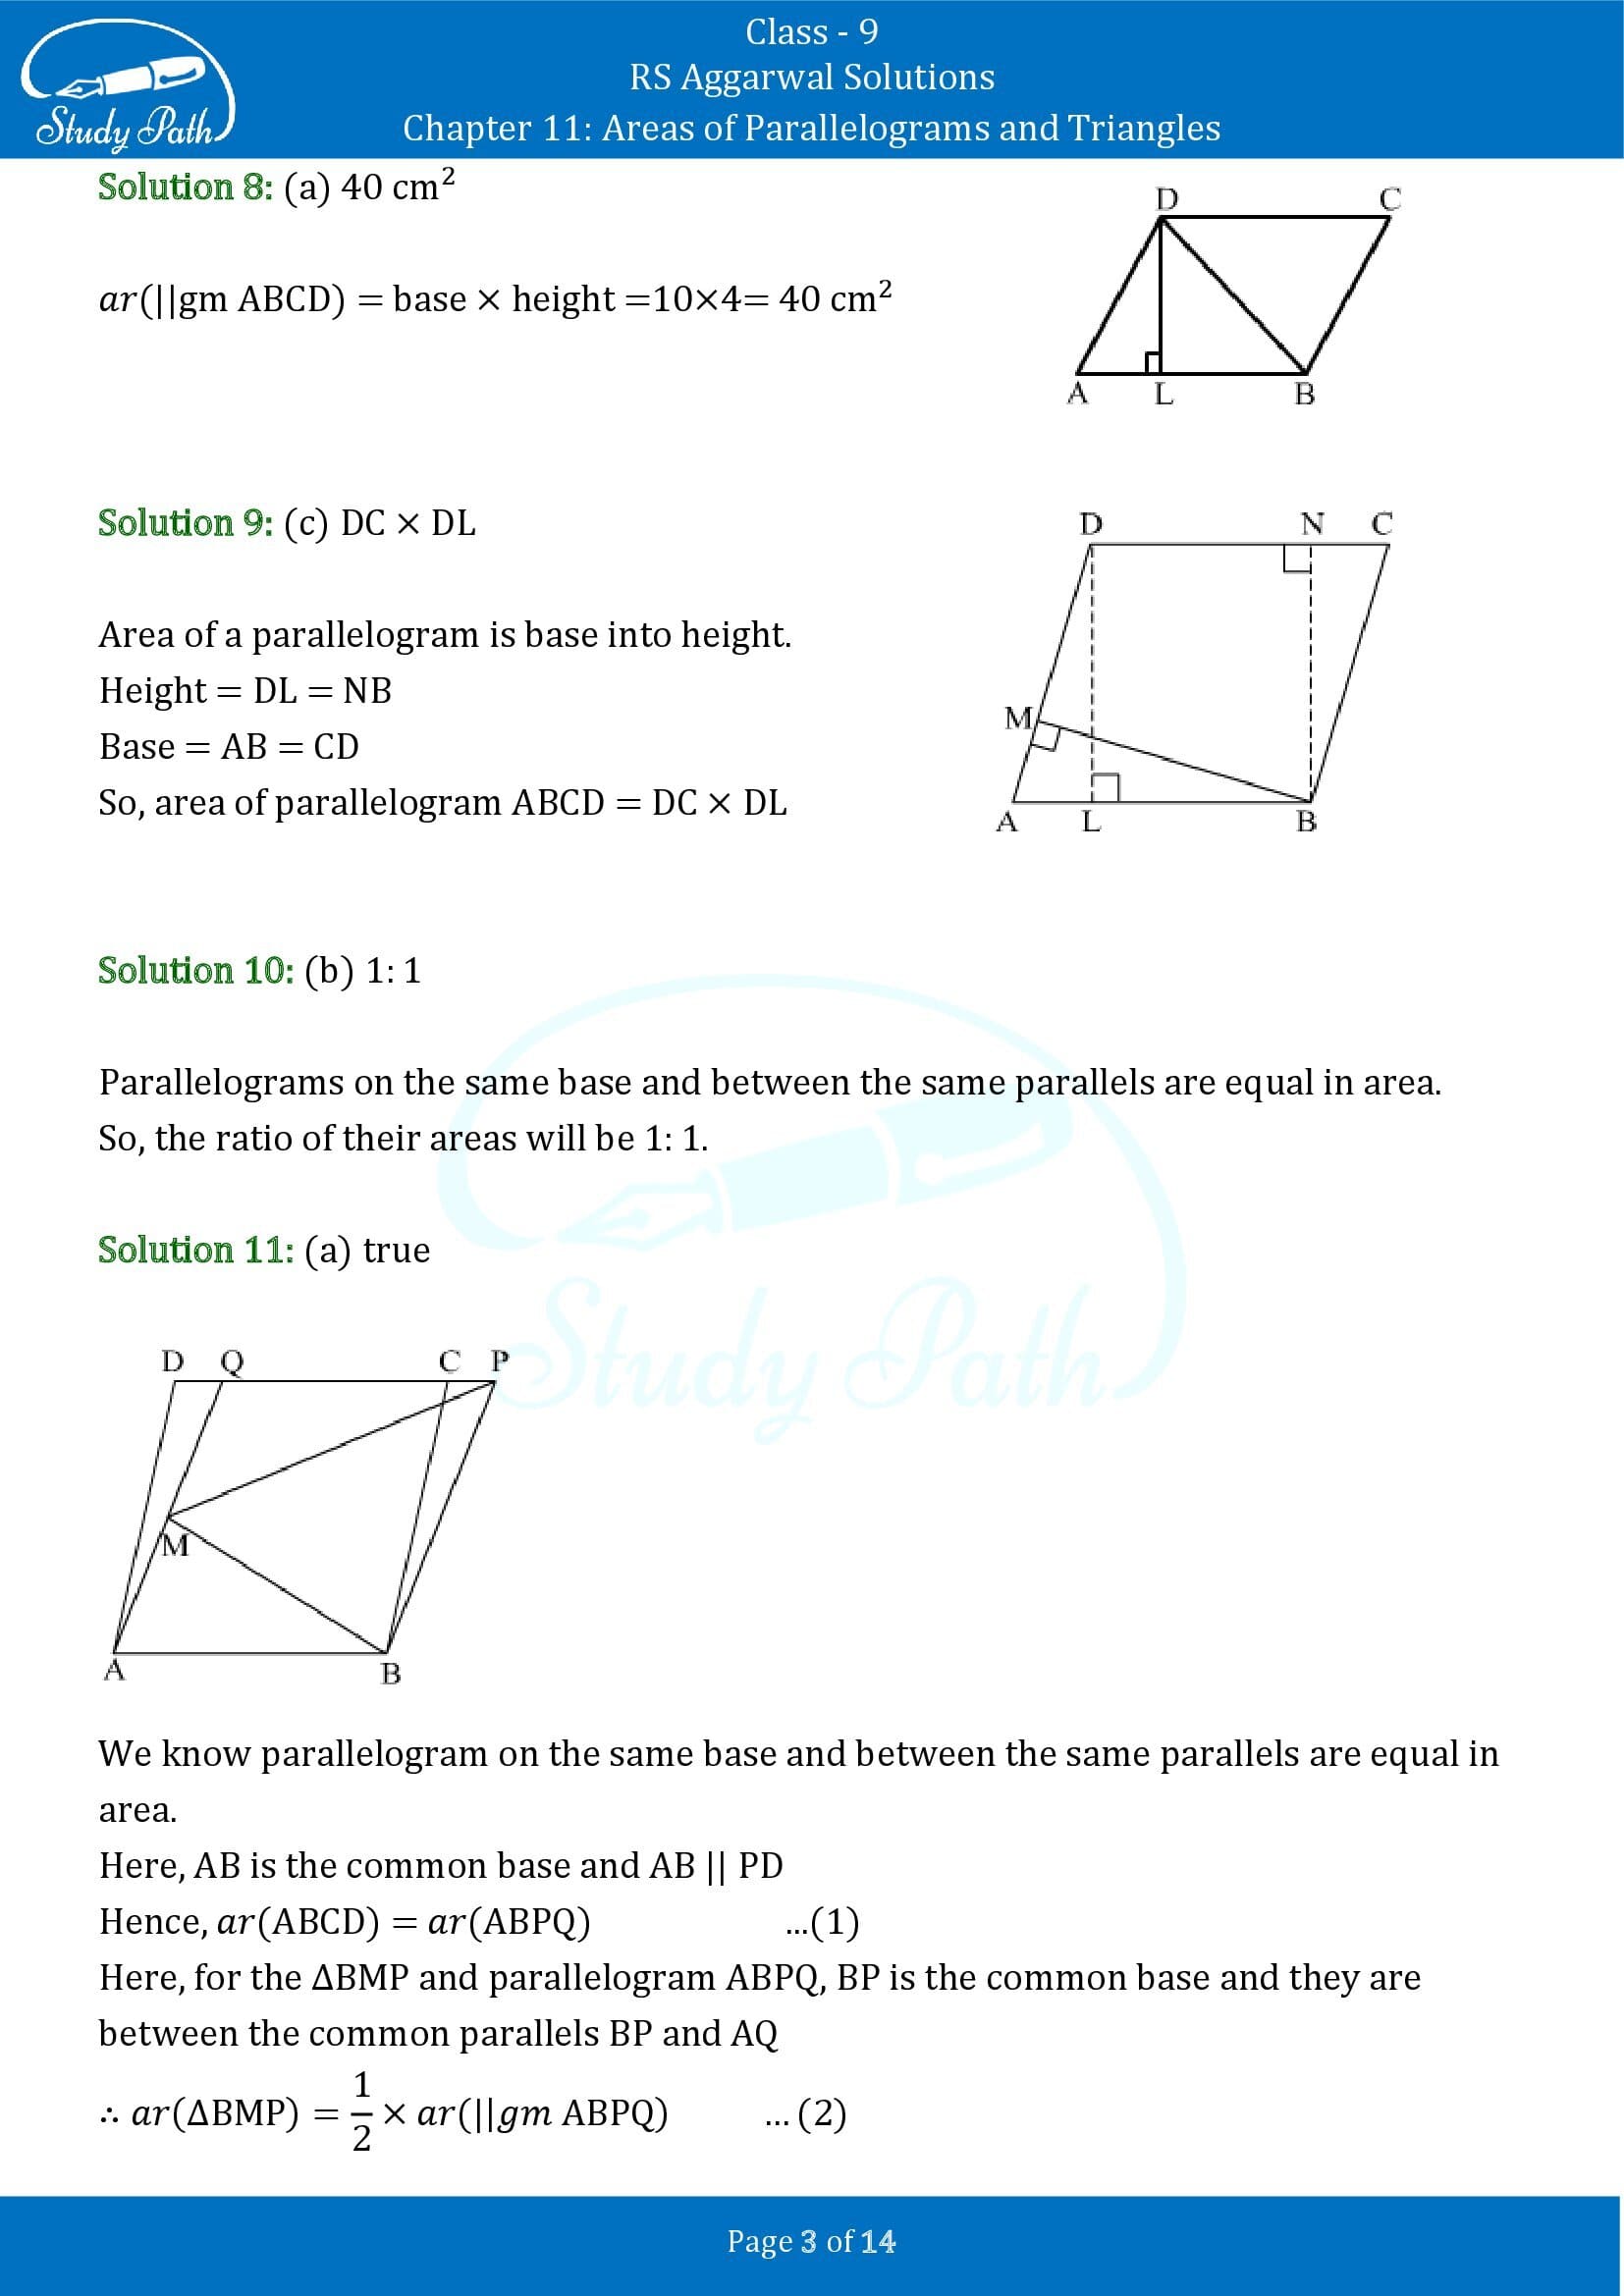 RS Aggarwal Solutions Class 9 Chapter 11 Areas of Parallelograms and Triangles Multiple Choice Questions MCQs 00003